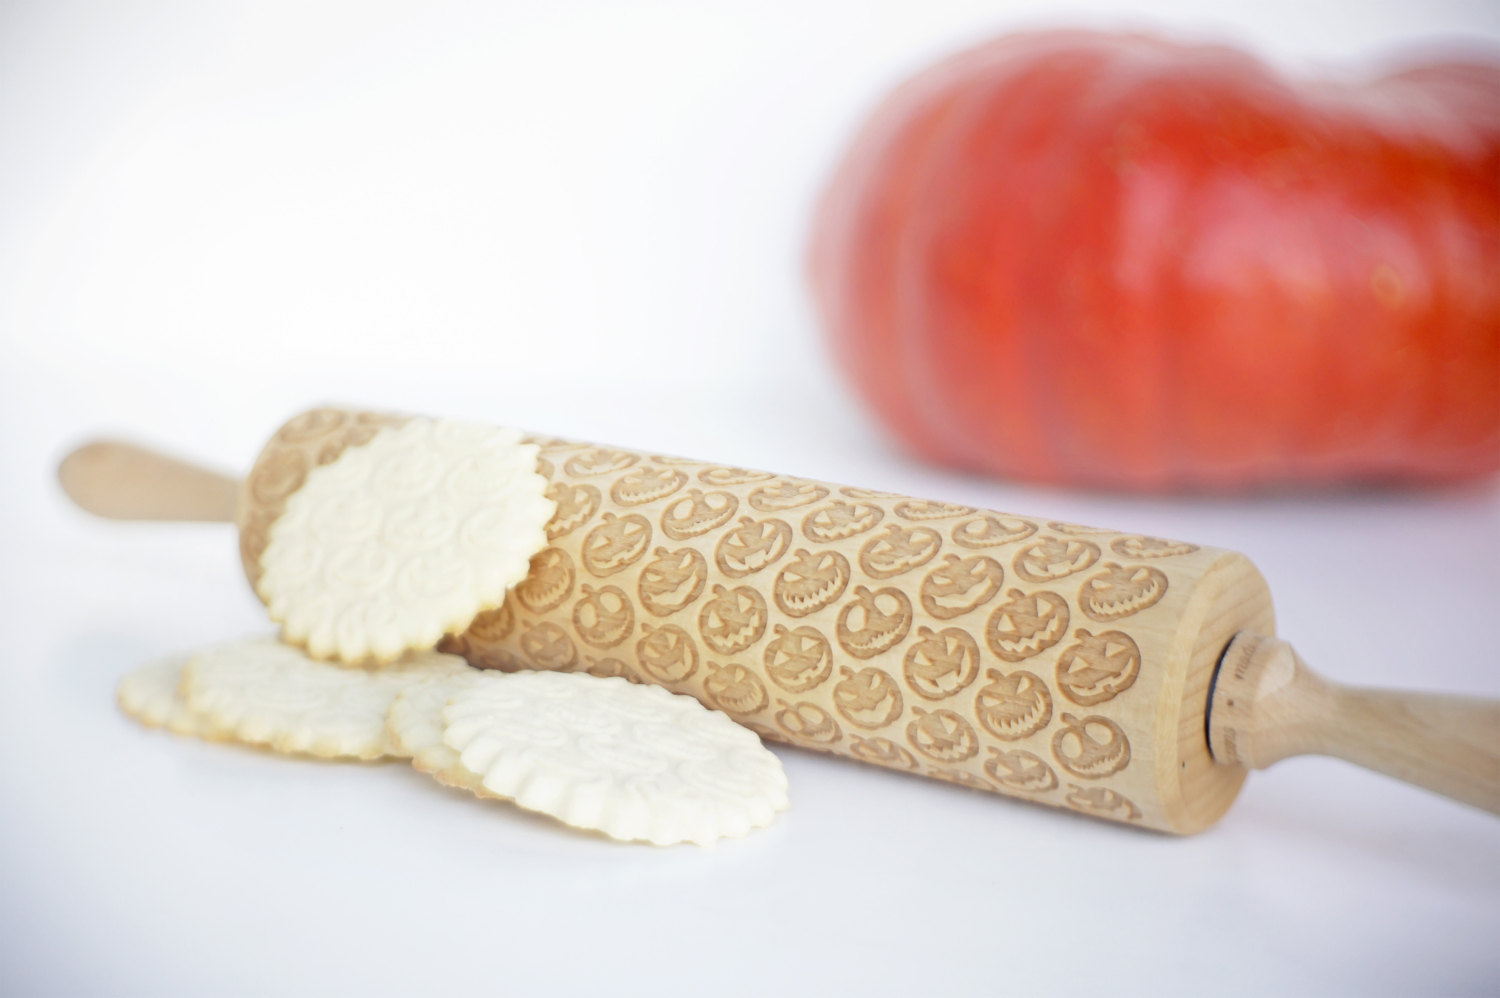 Rolling pin embossed, Engraved Rolling Pin, With Pumpkin